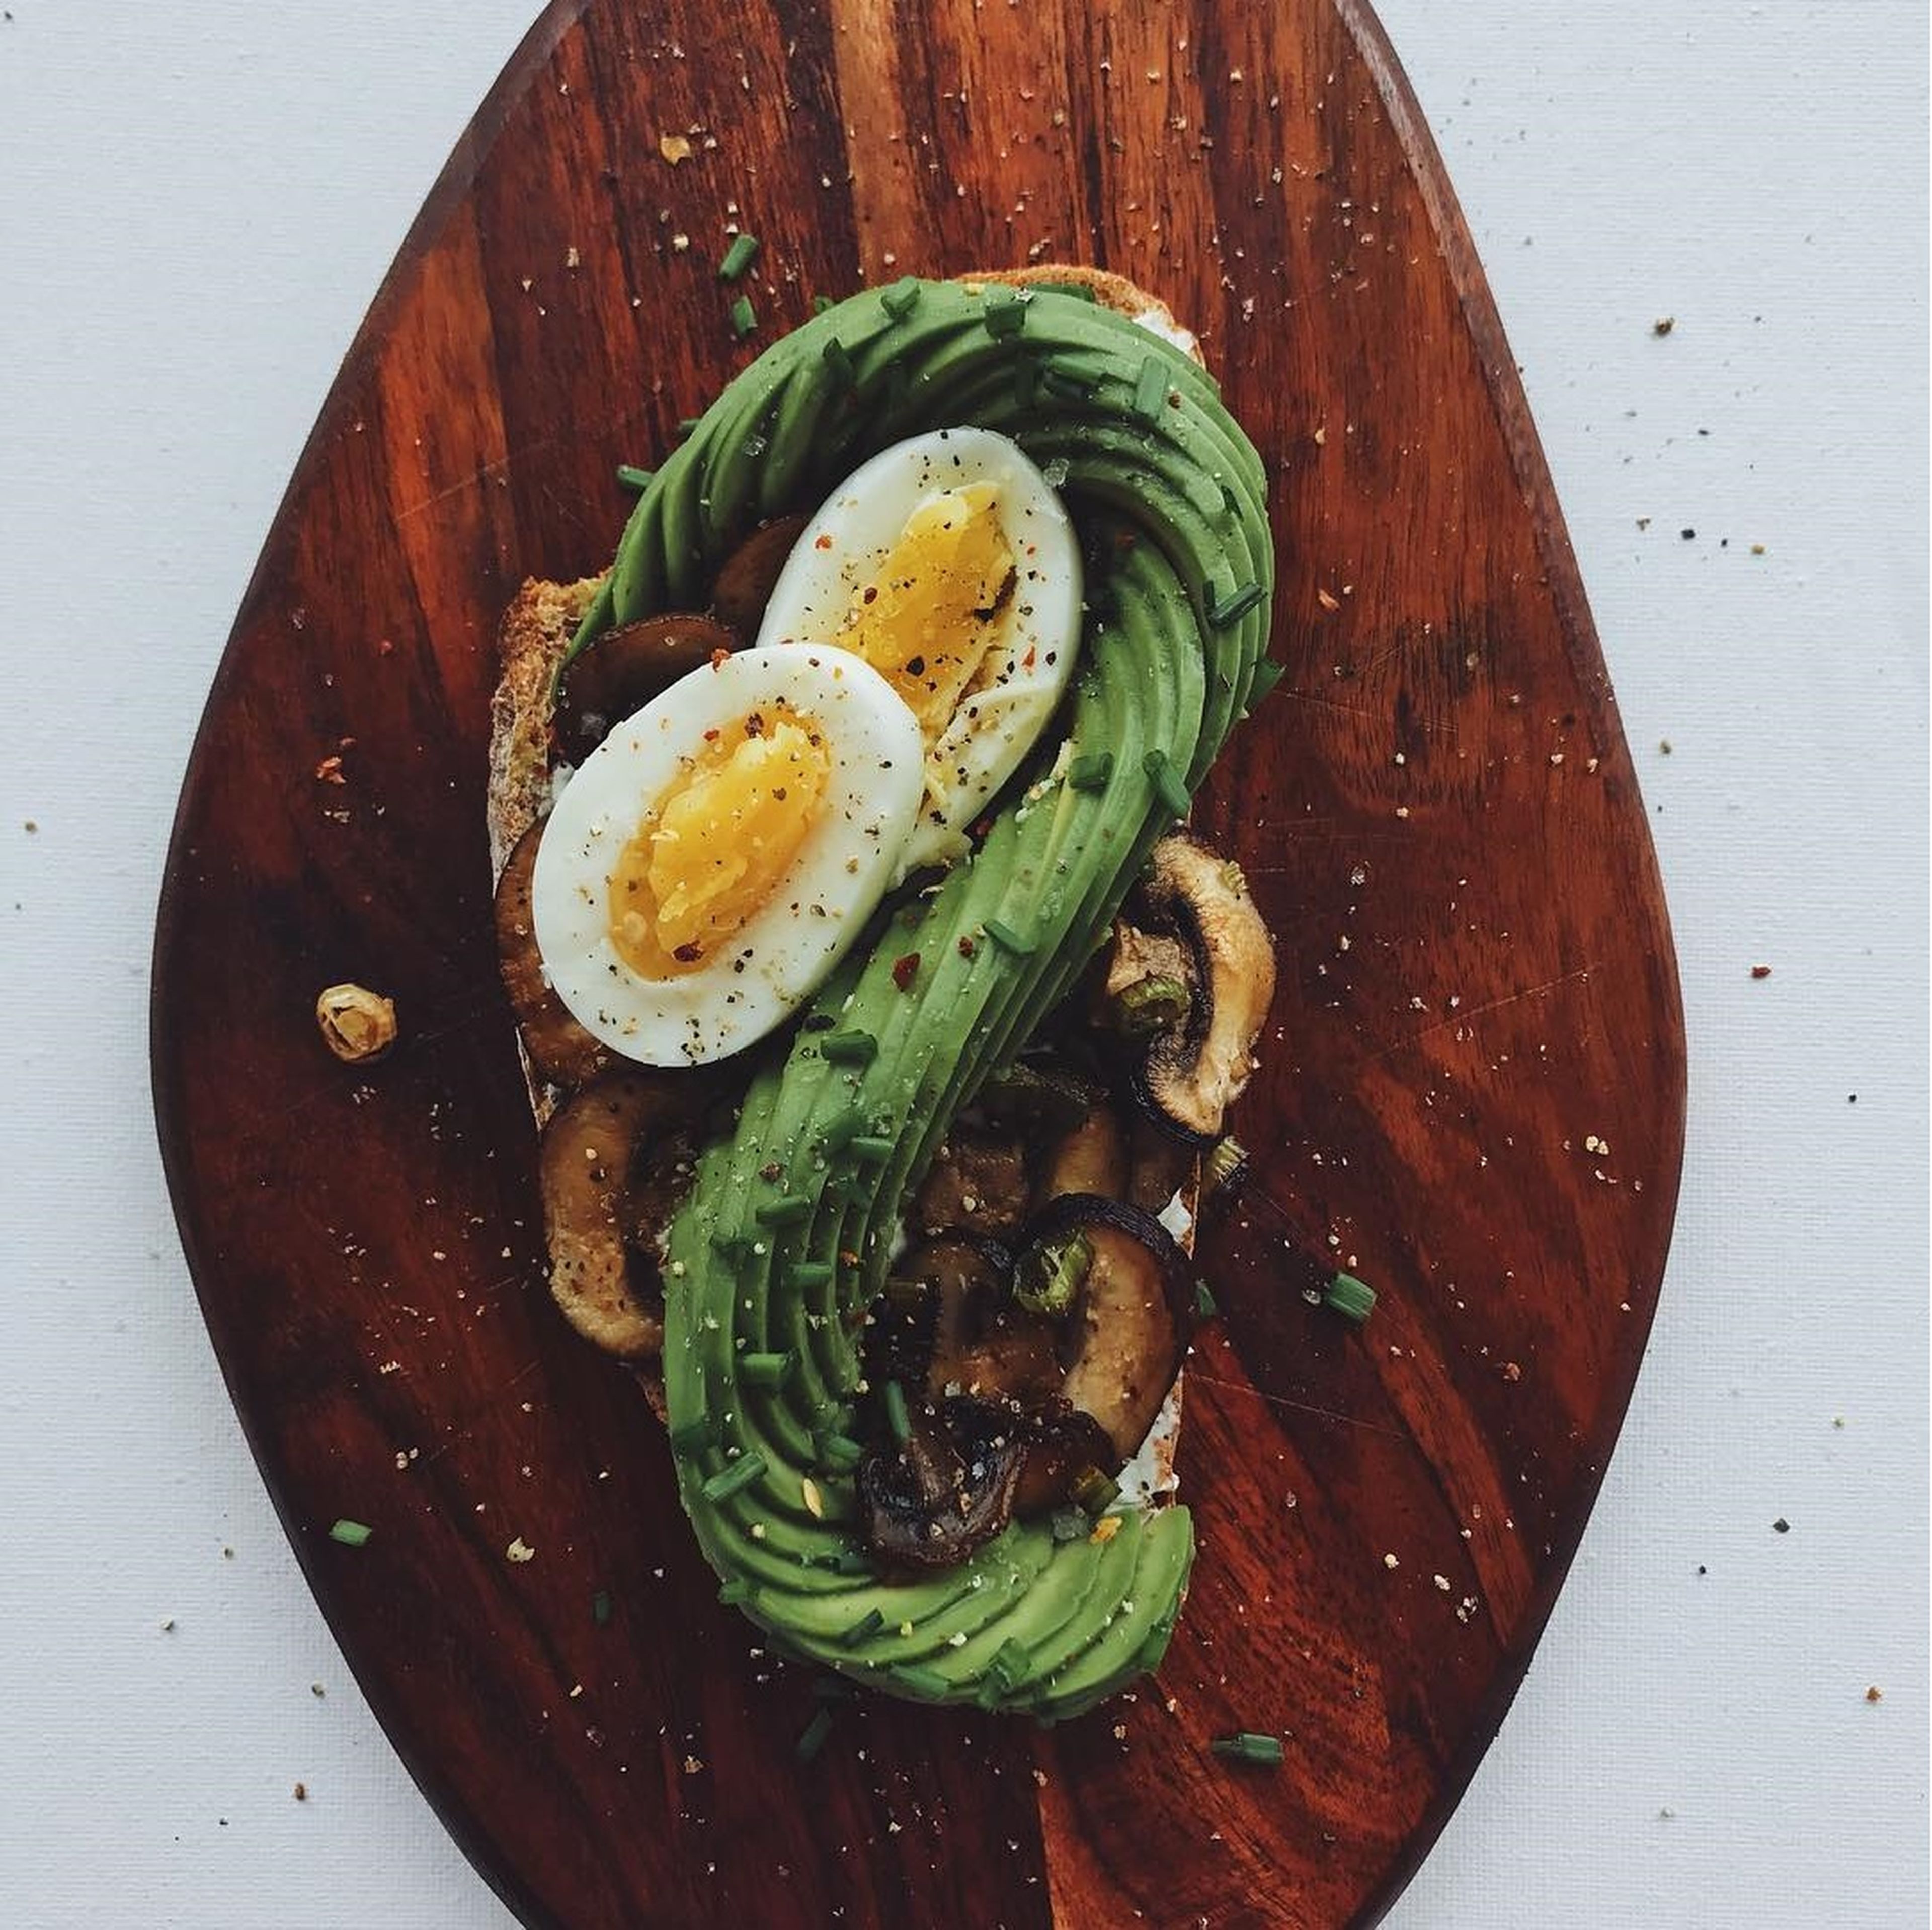 Bread with eggs and avocado